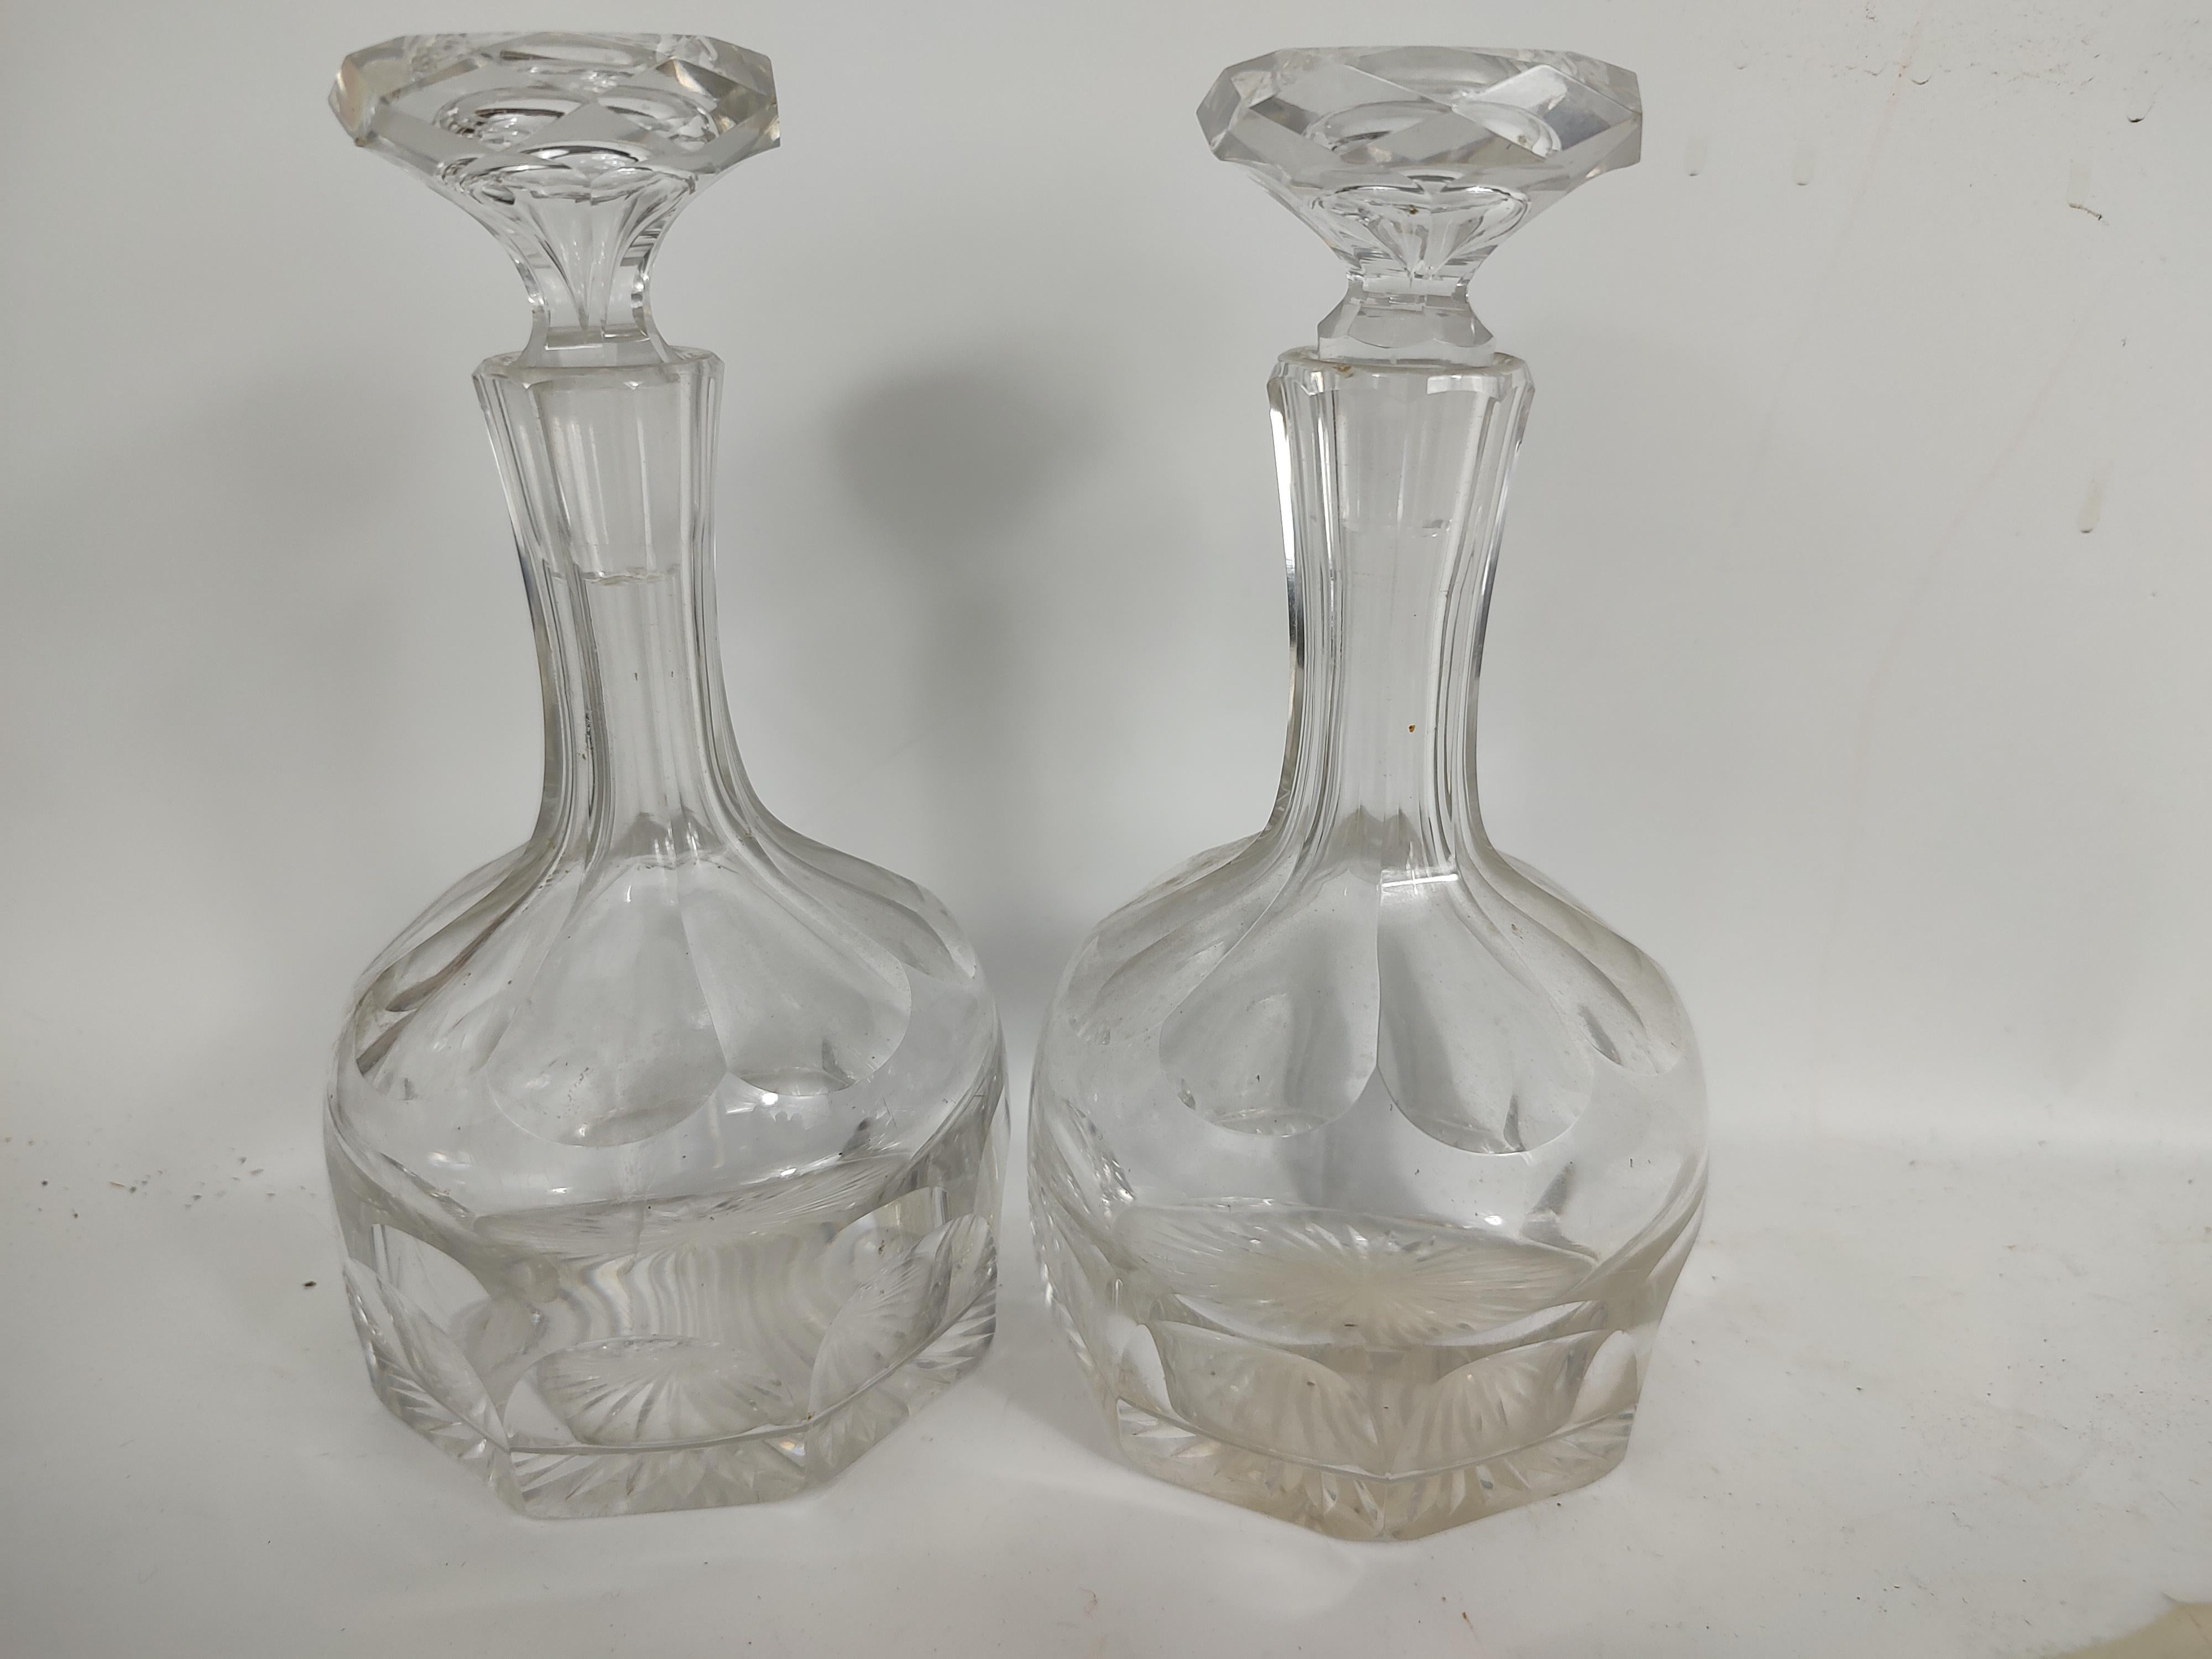 Pair of Petite Cut Glass Crystal Decanters, C1930 For Sale 1